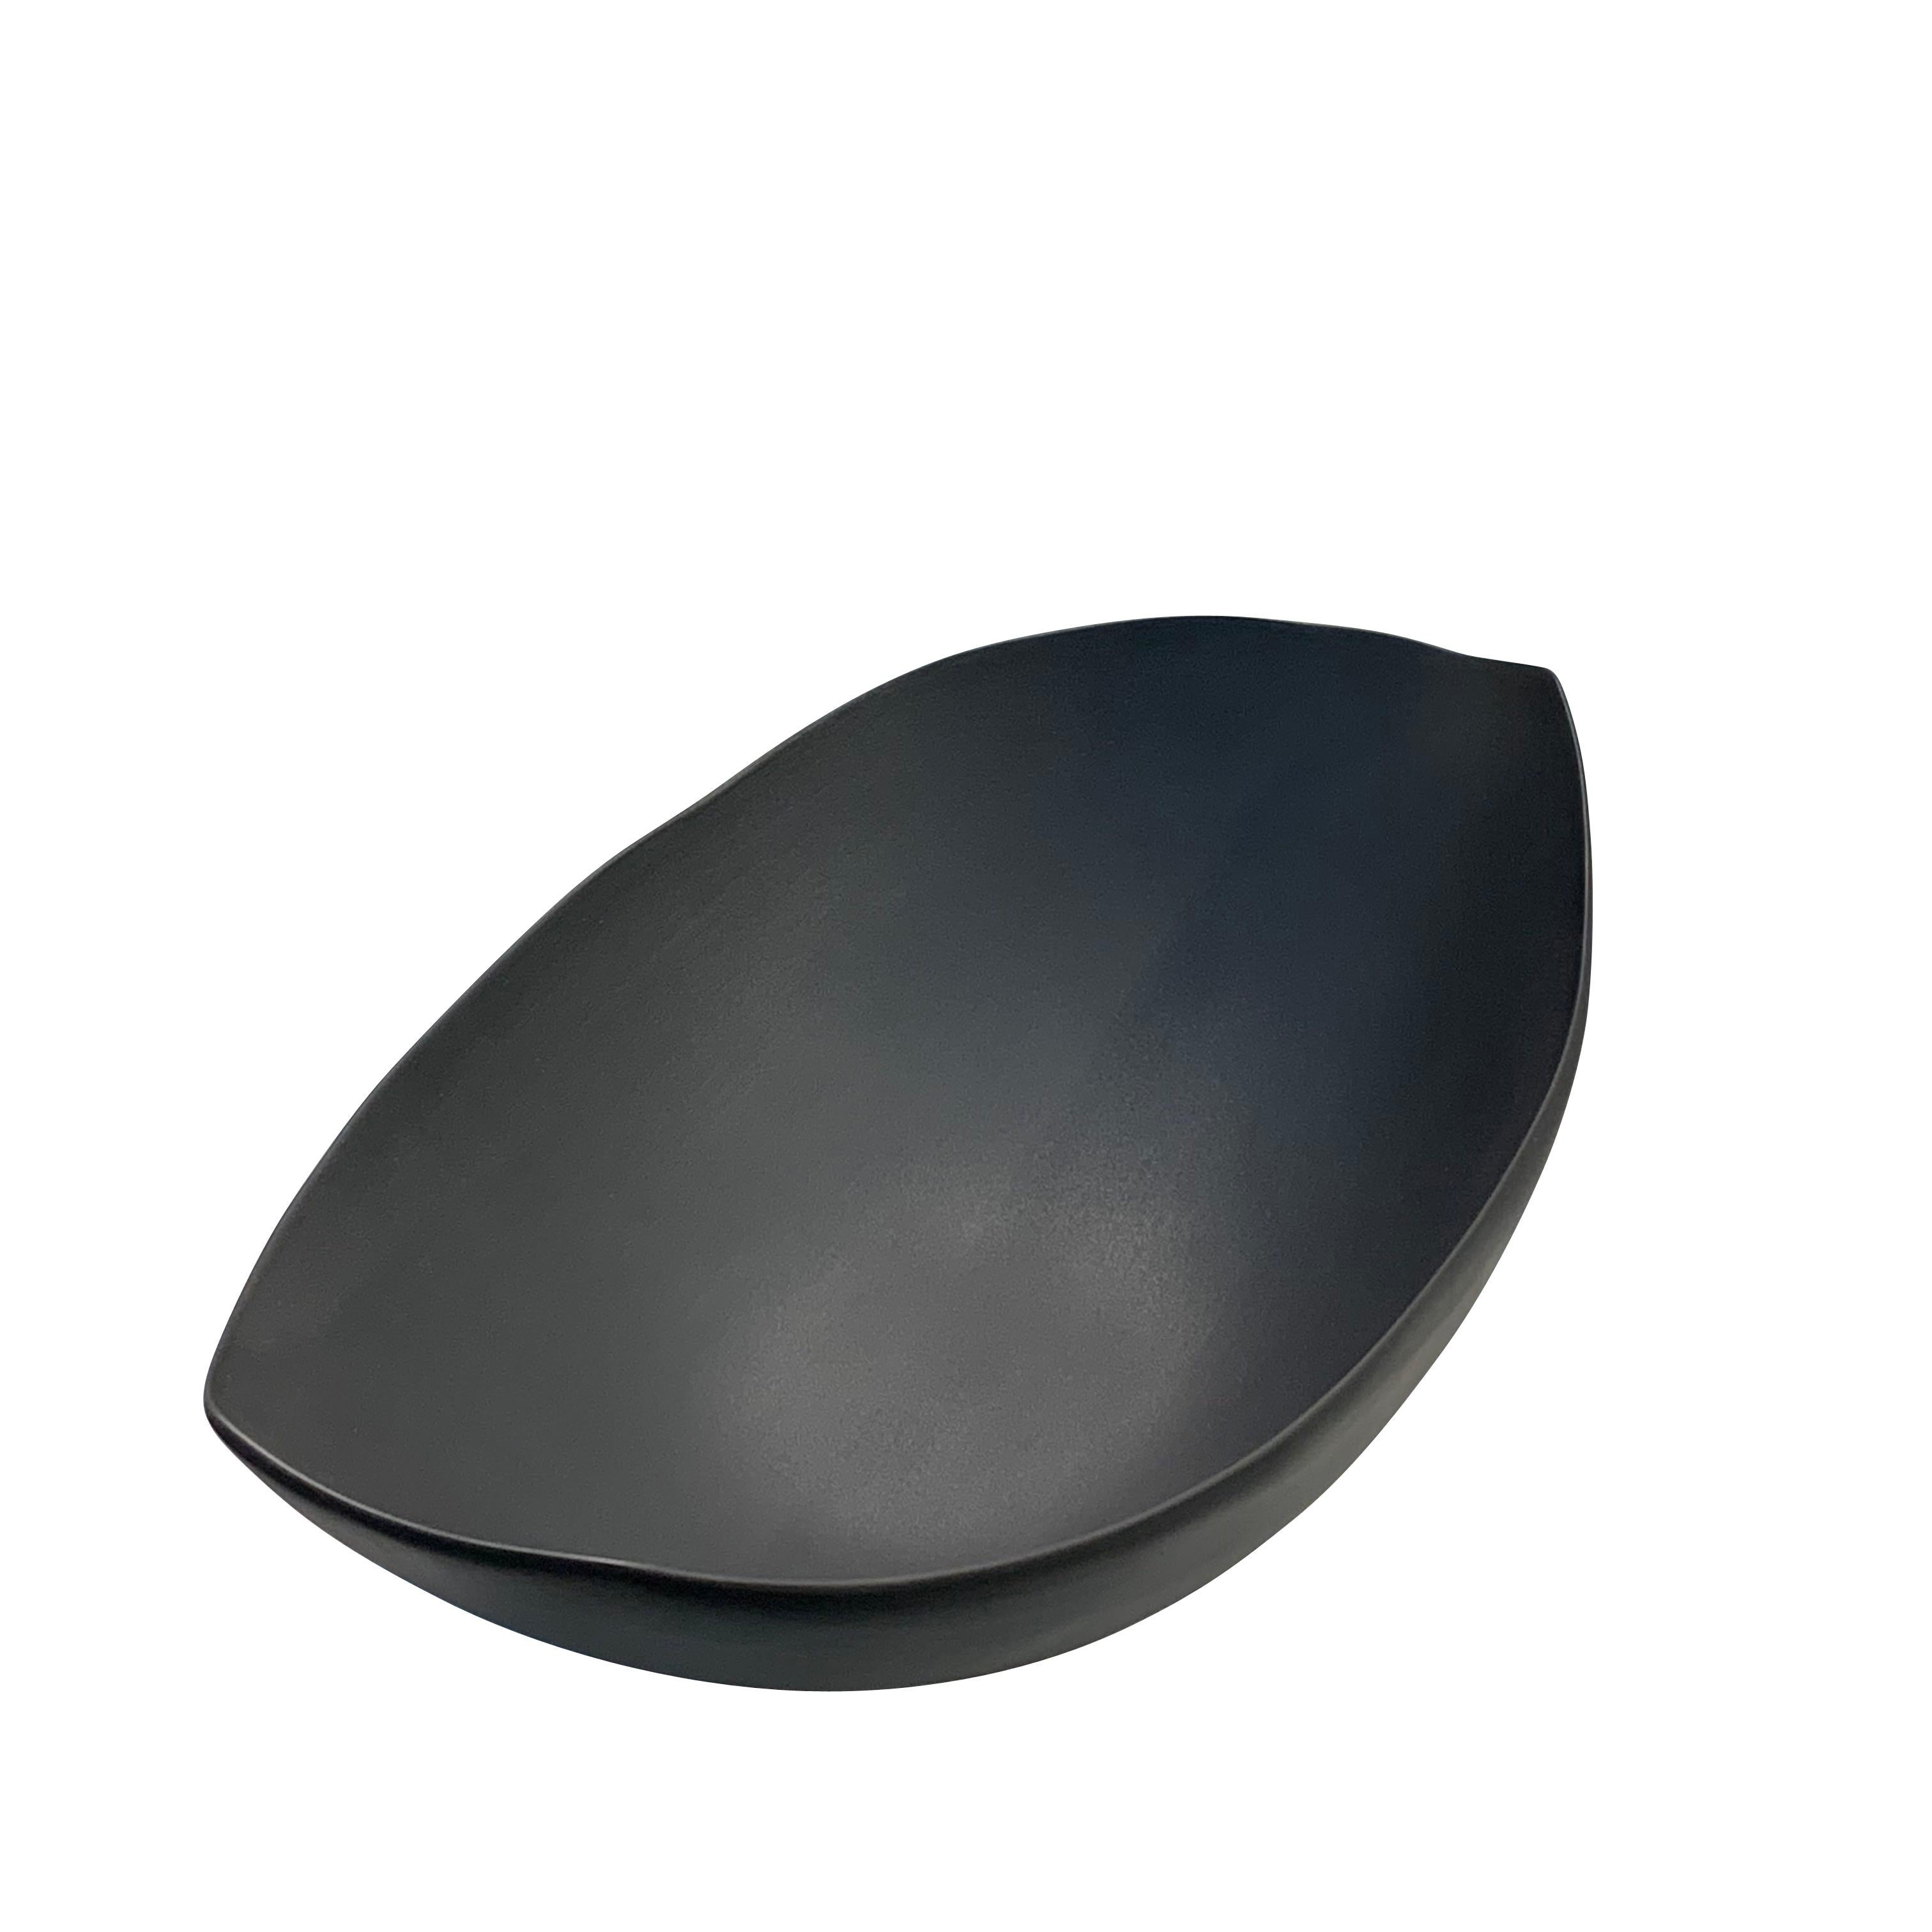 Contemporary Italian oval shaped fine ceramic bowl in black
Larger white version also available (S5490).

 